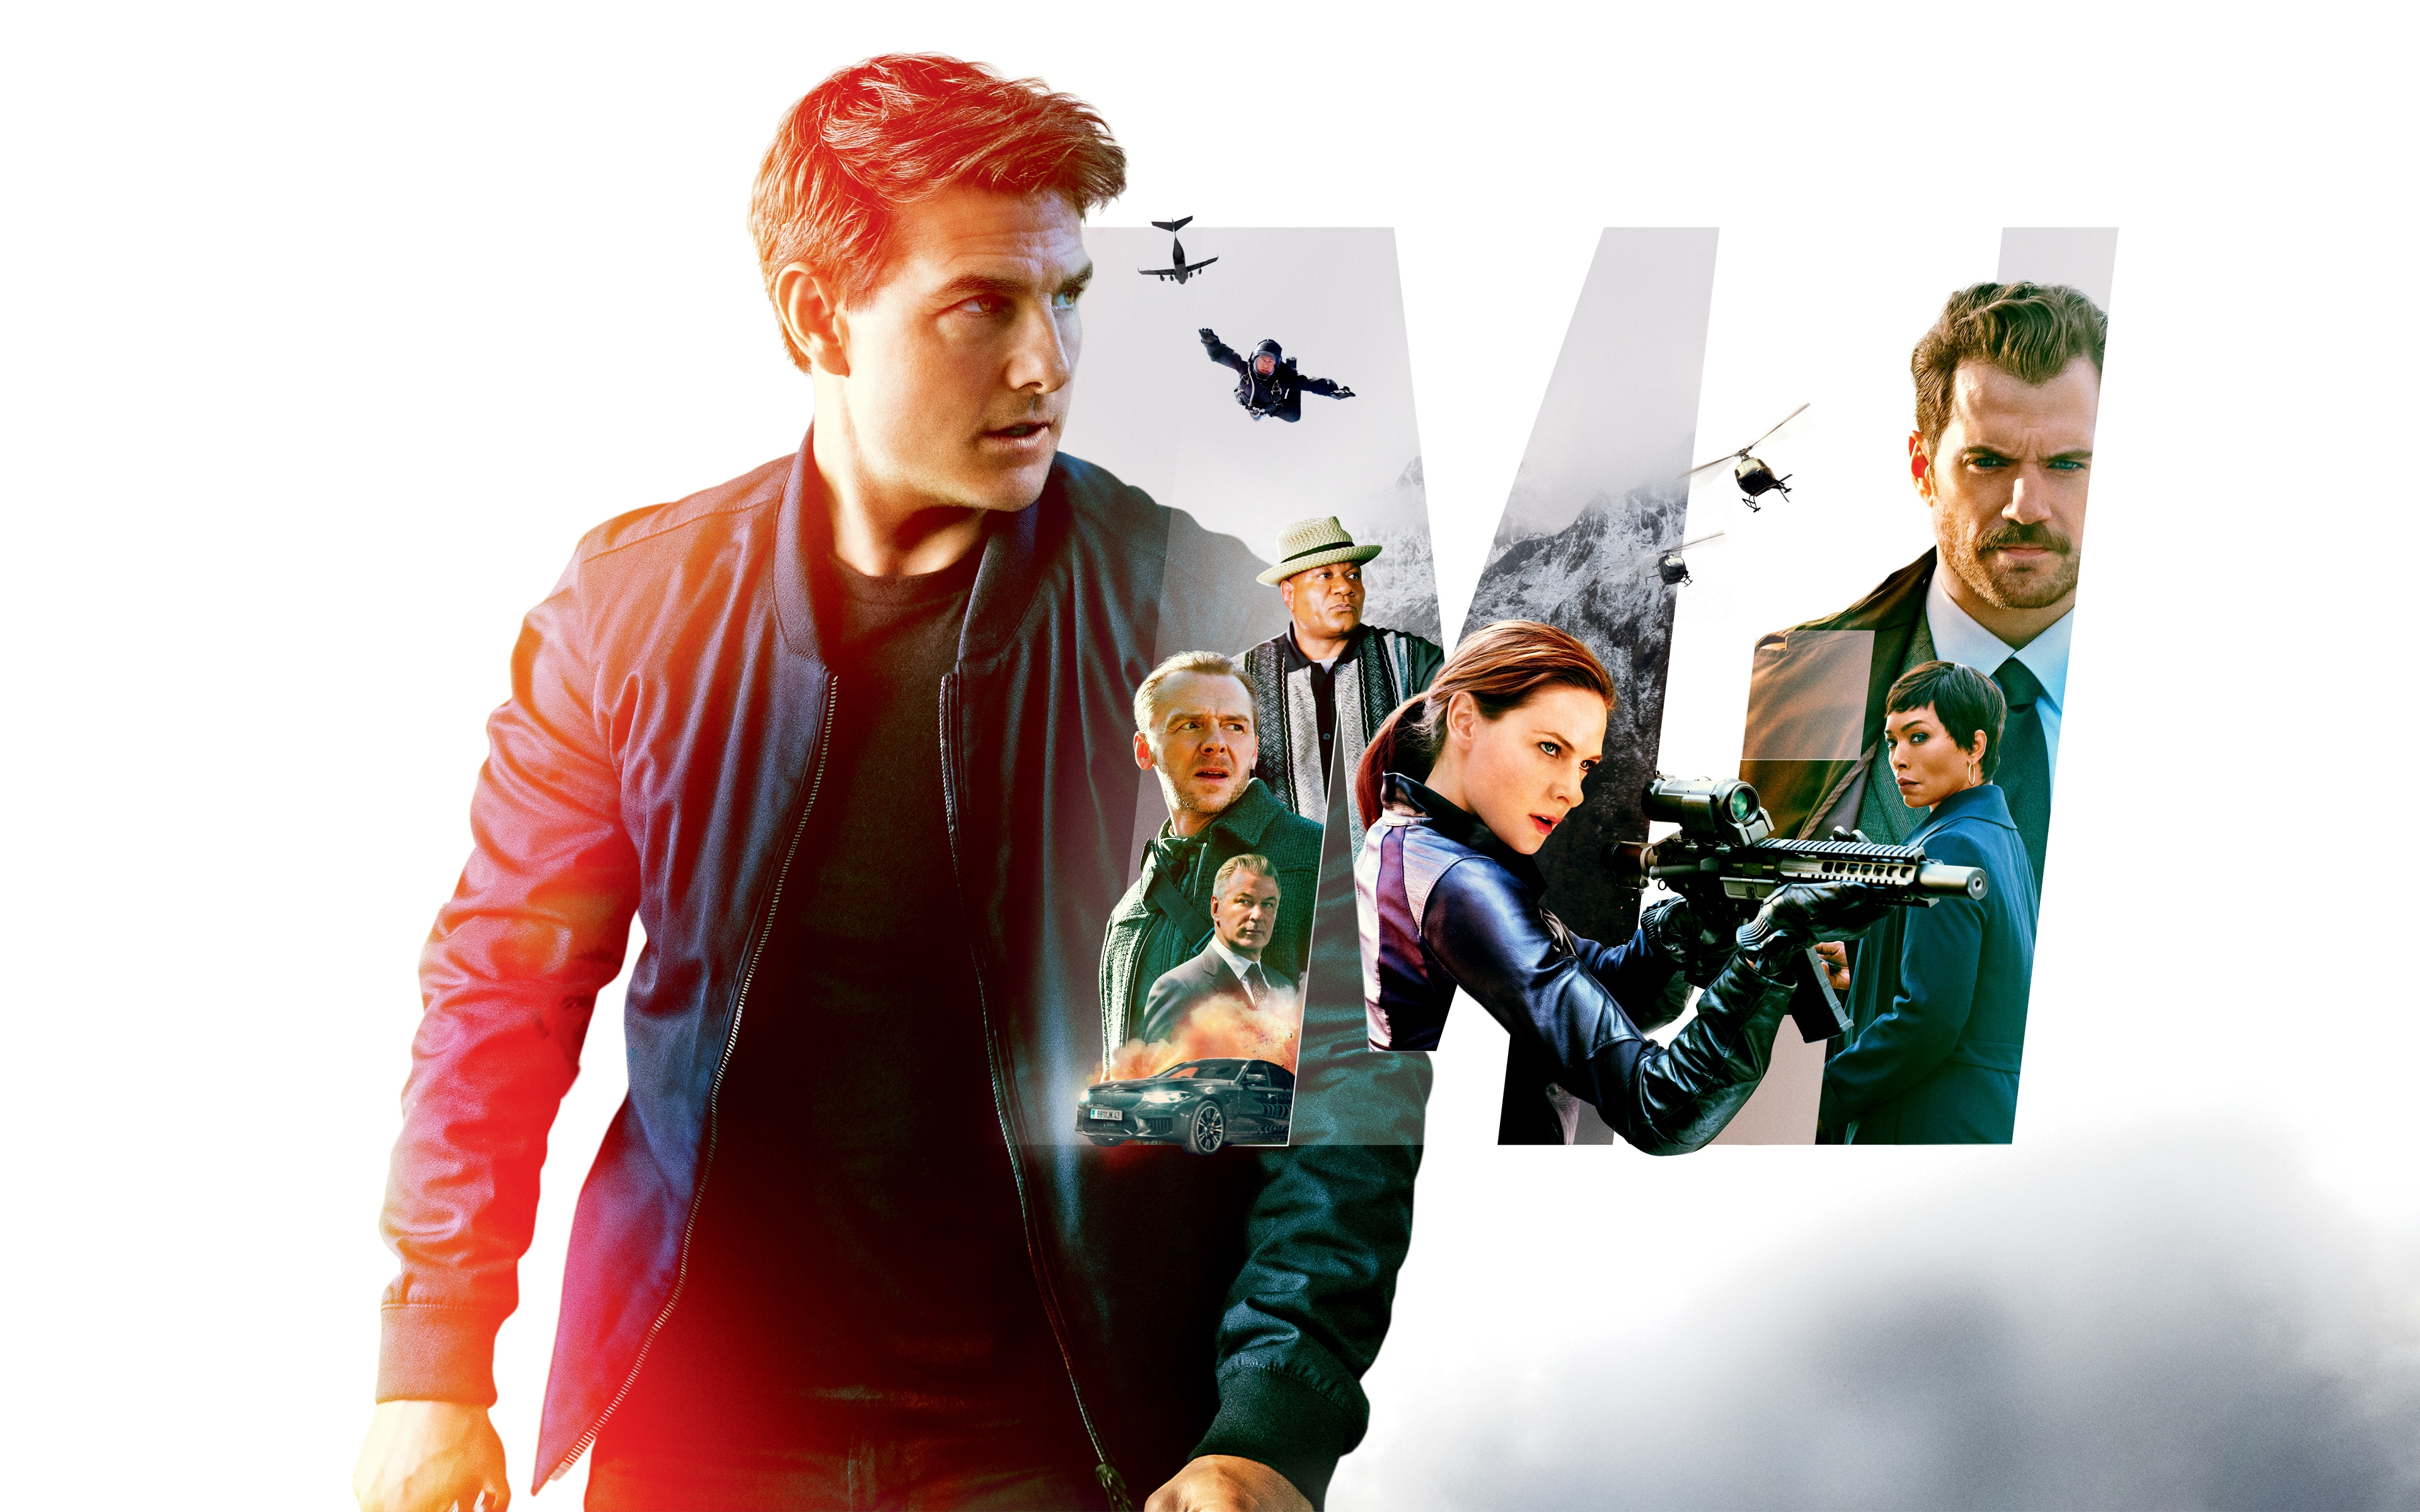 Wallpapers wallpaper tom cruise mission movies on the desktop